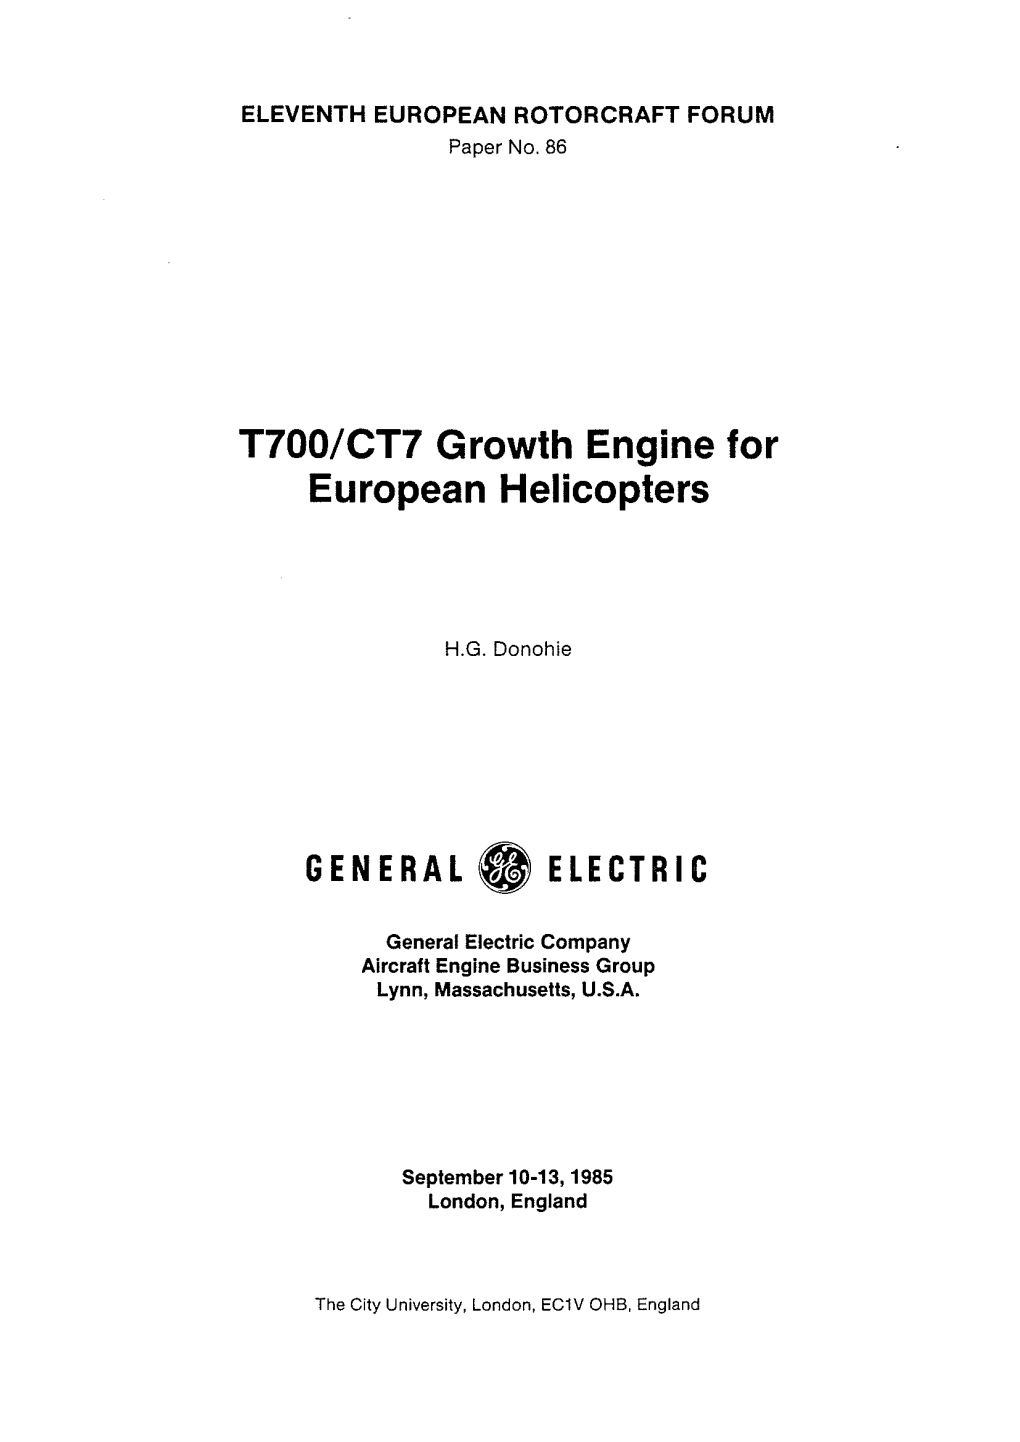 T700/CT7 Growth Engine for European Helicopters